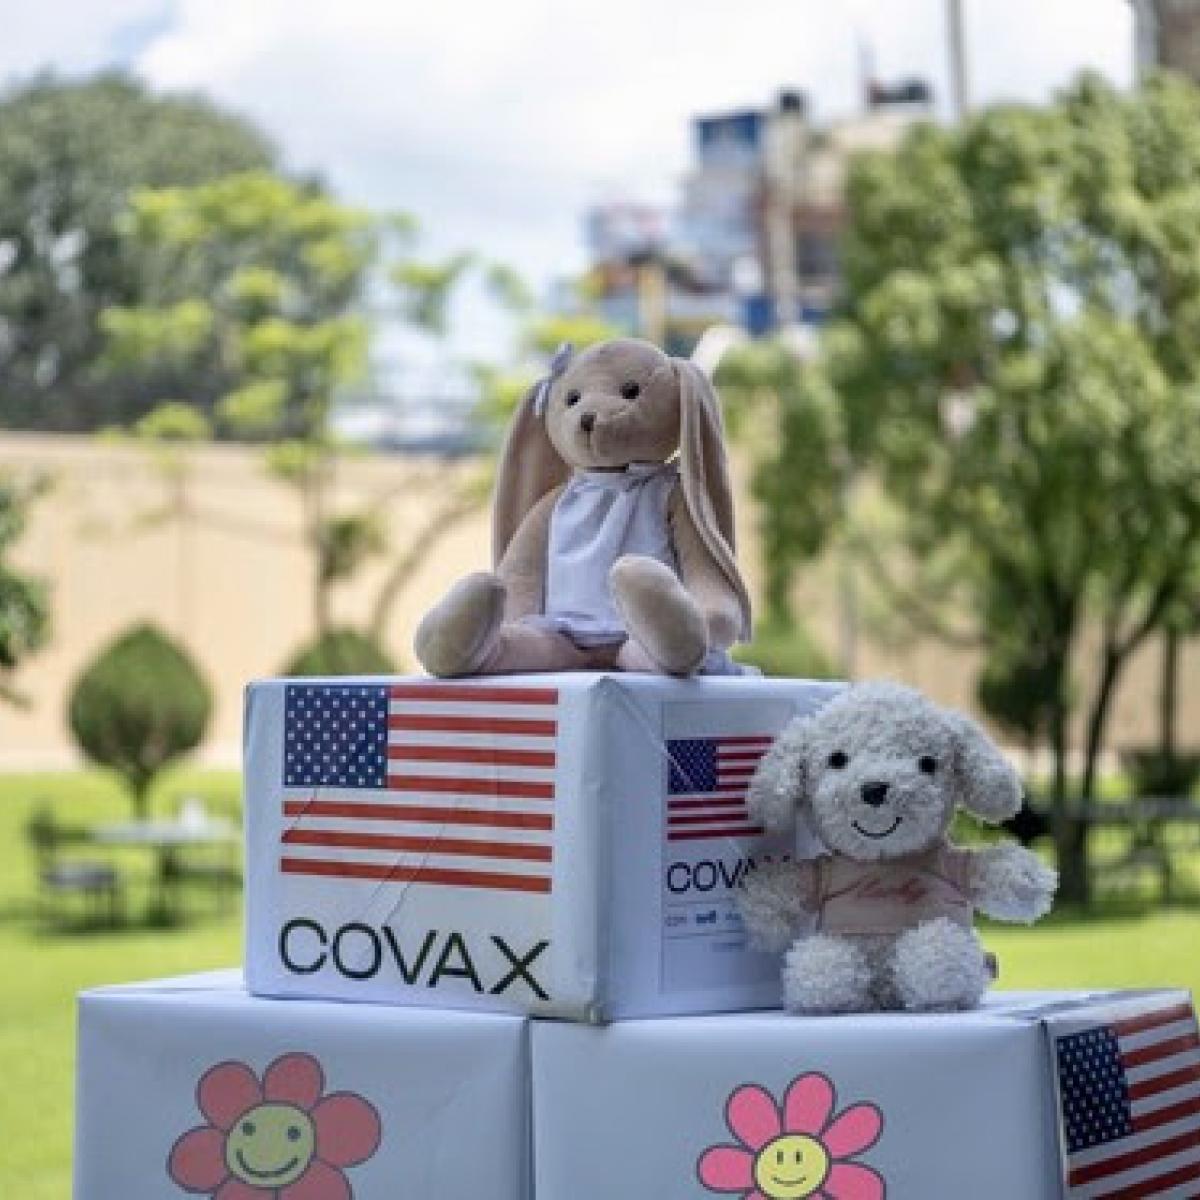 In collaboration with COVAX, USAID will now continue to ship pediatric doses to partner countries around the world that have requested them.